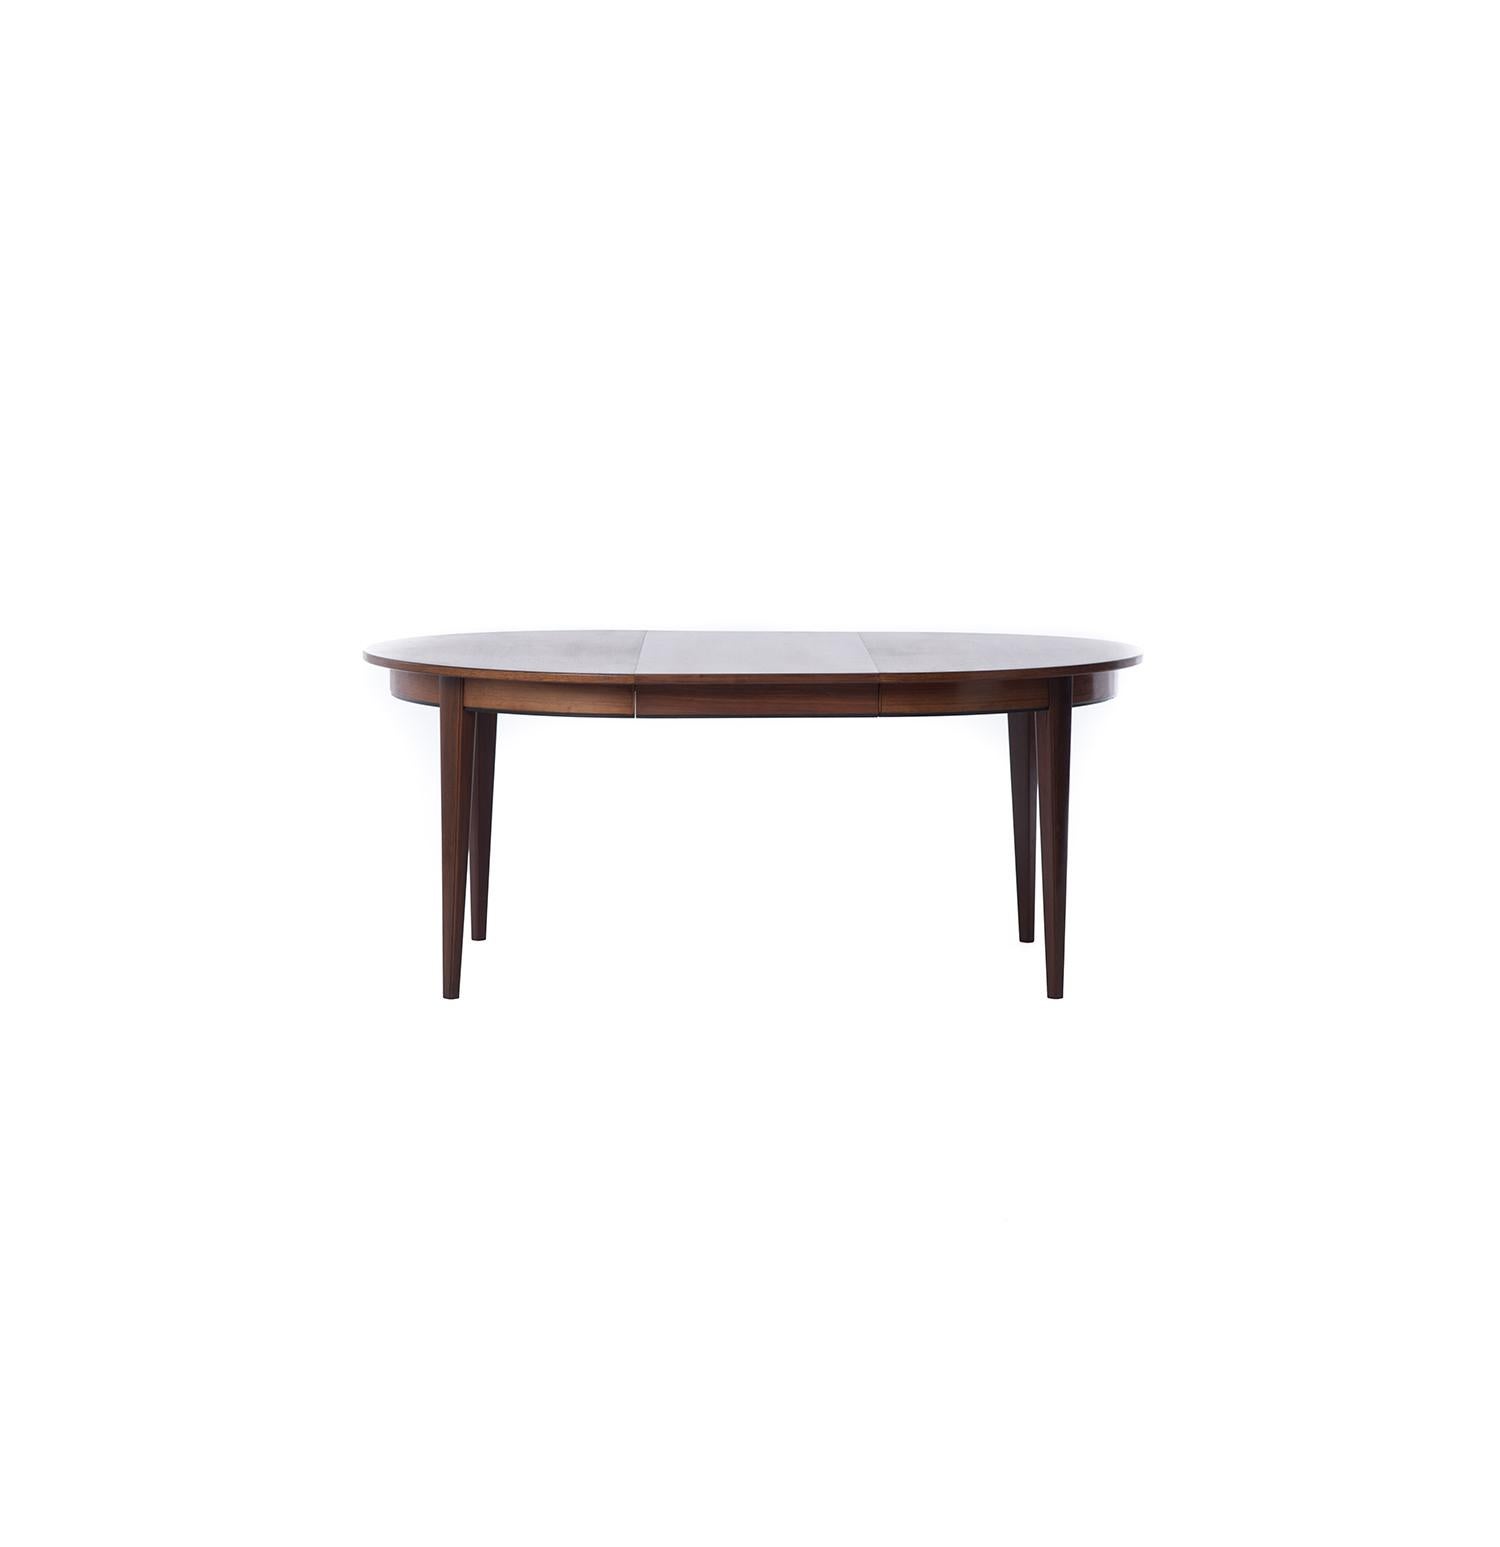 Lacquered Danish Modern Rosewood Round to Oval Dining Table with Two Leaves